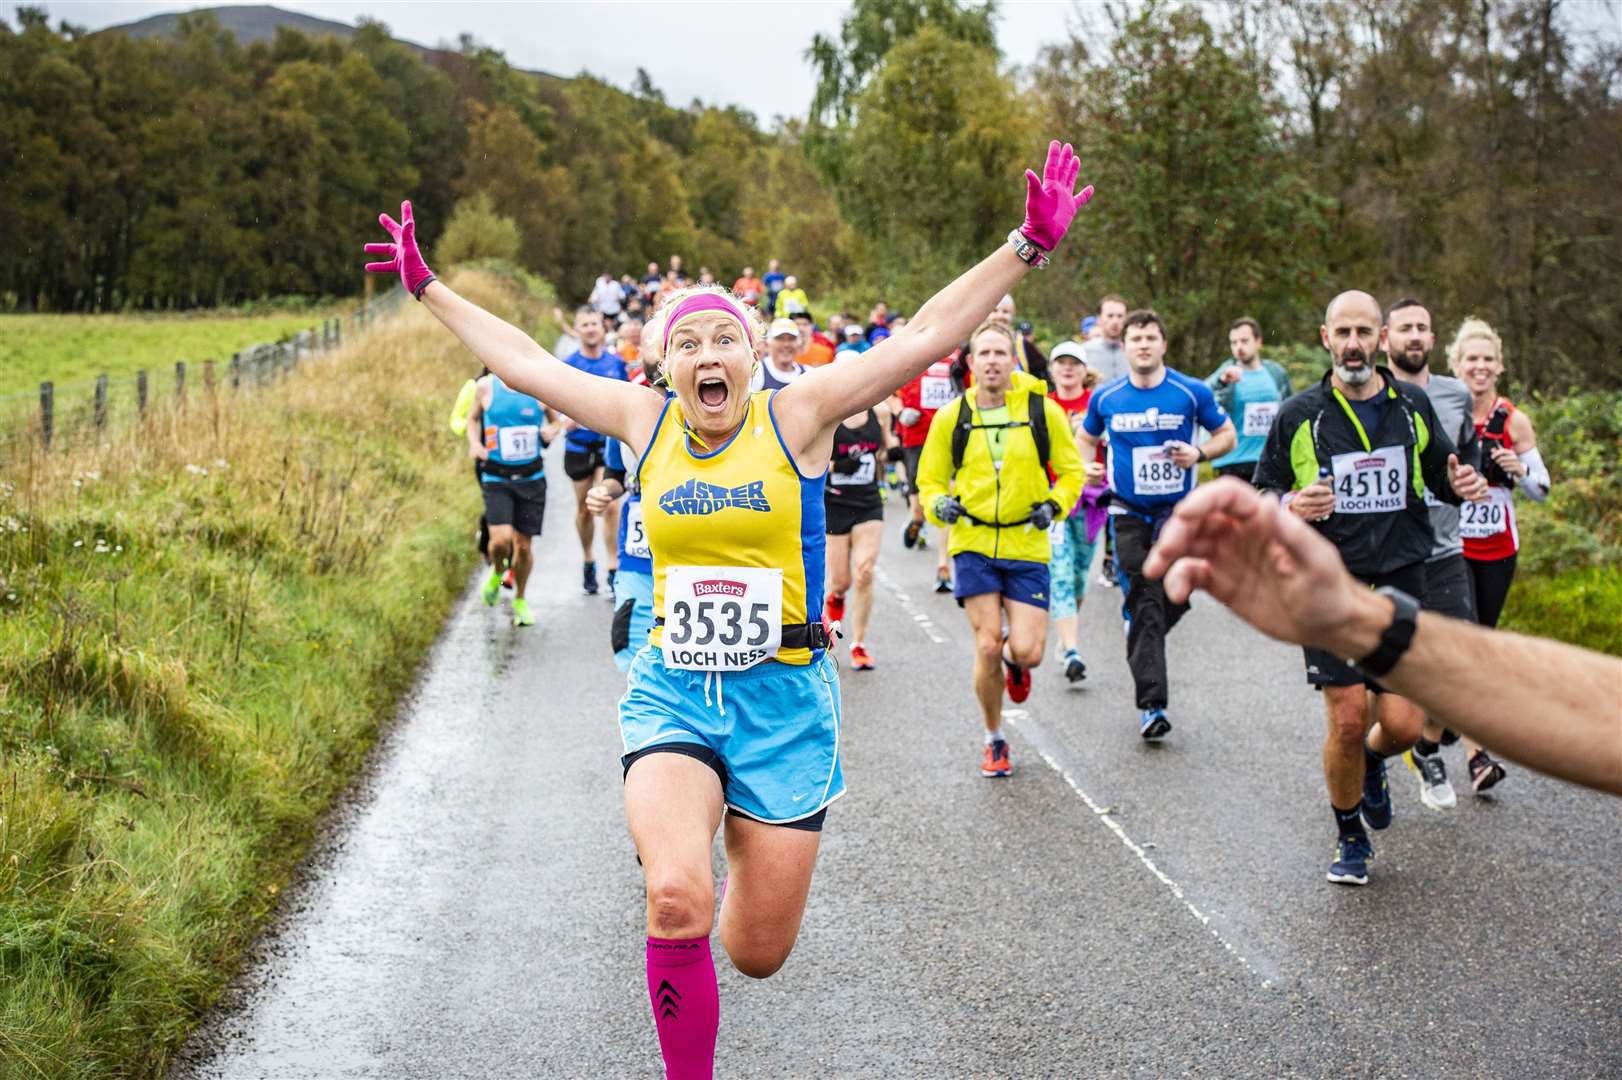 Loch Ness Marathon has proven increasingly popular with runners.